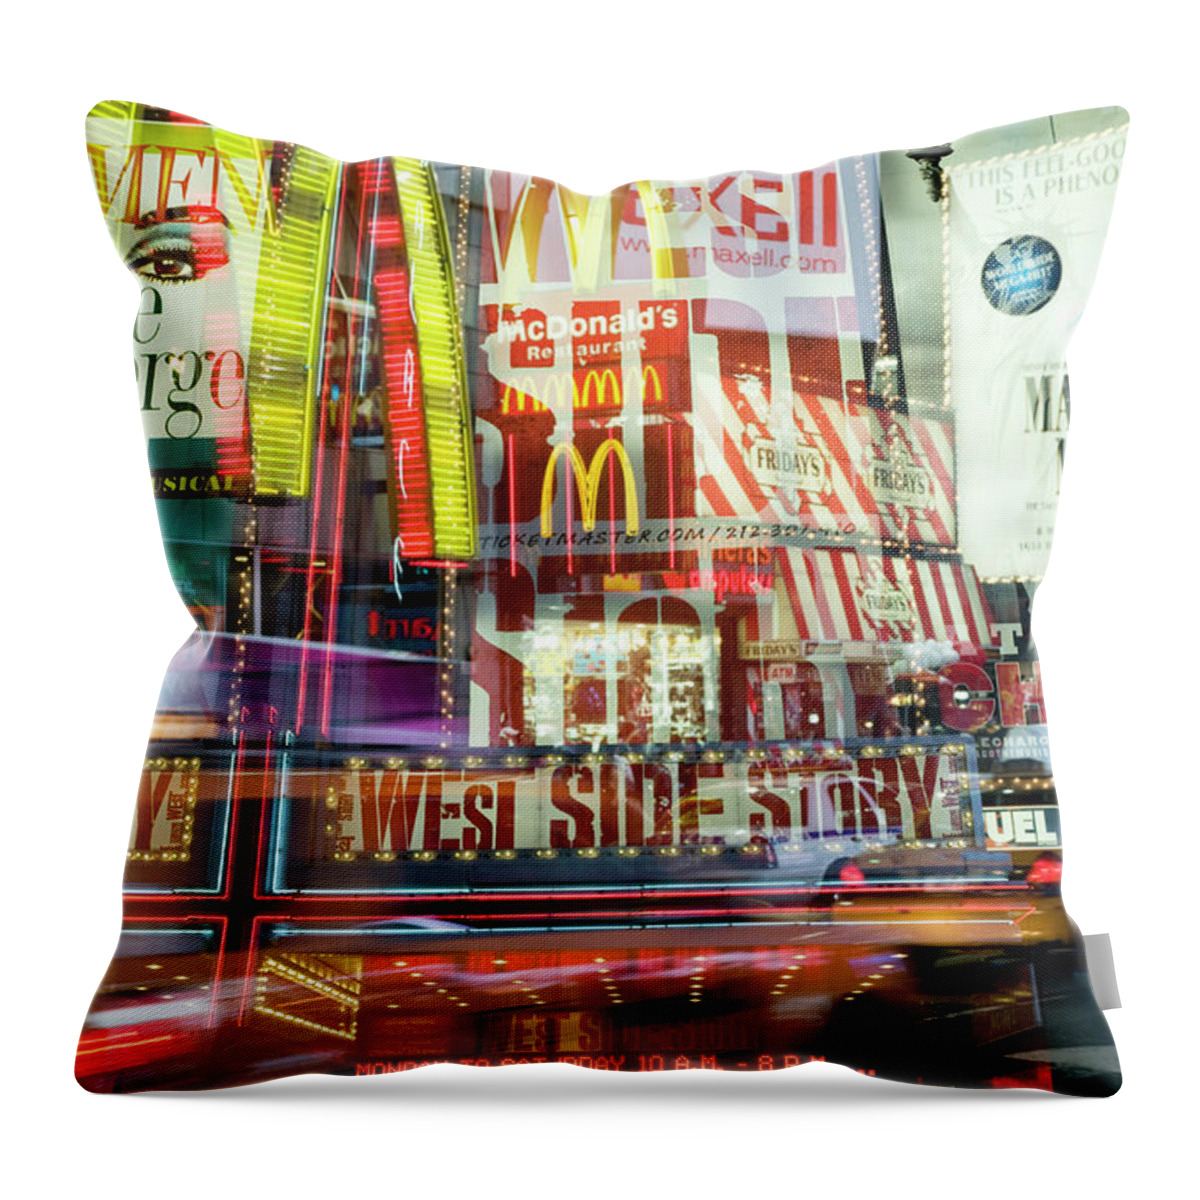 The Media Throw Pillow featuring the photograph Surrounded By Times Square At Twilight by Travelif